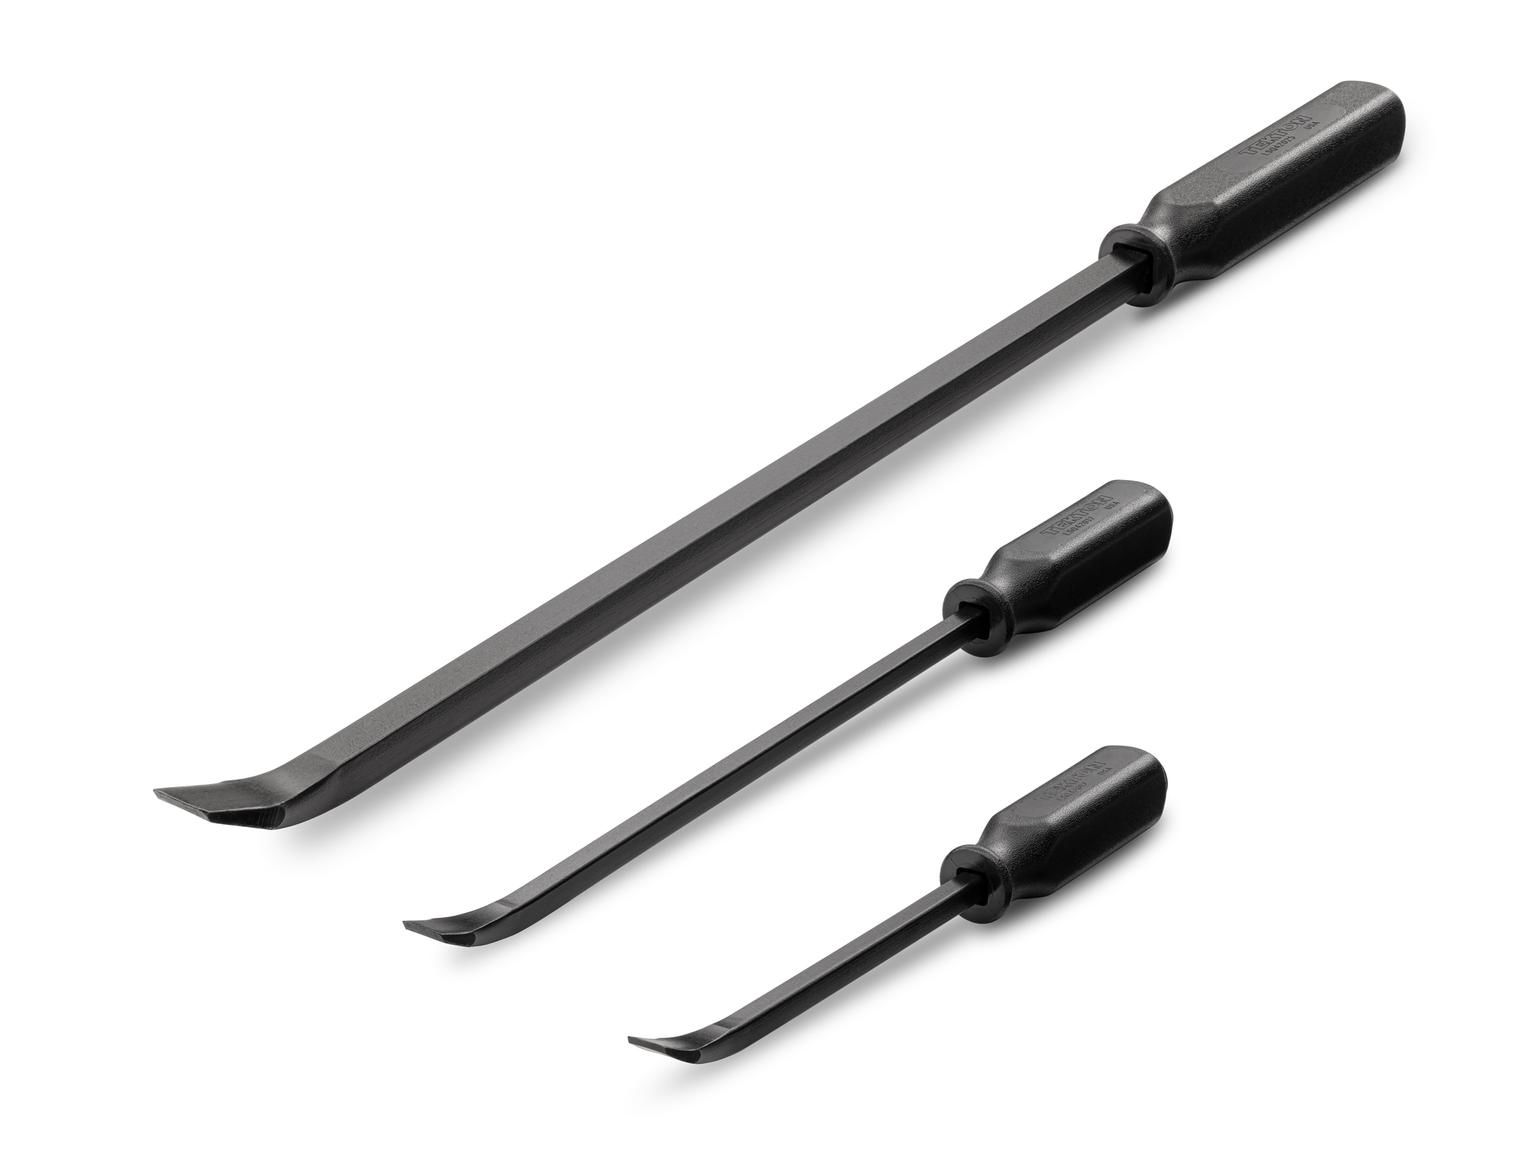 Angled End Handled Pry Bar Set, 3-Piece (12, 17, 25 in.)